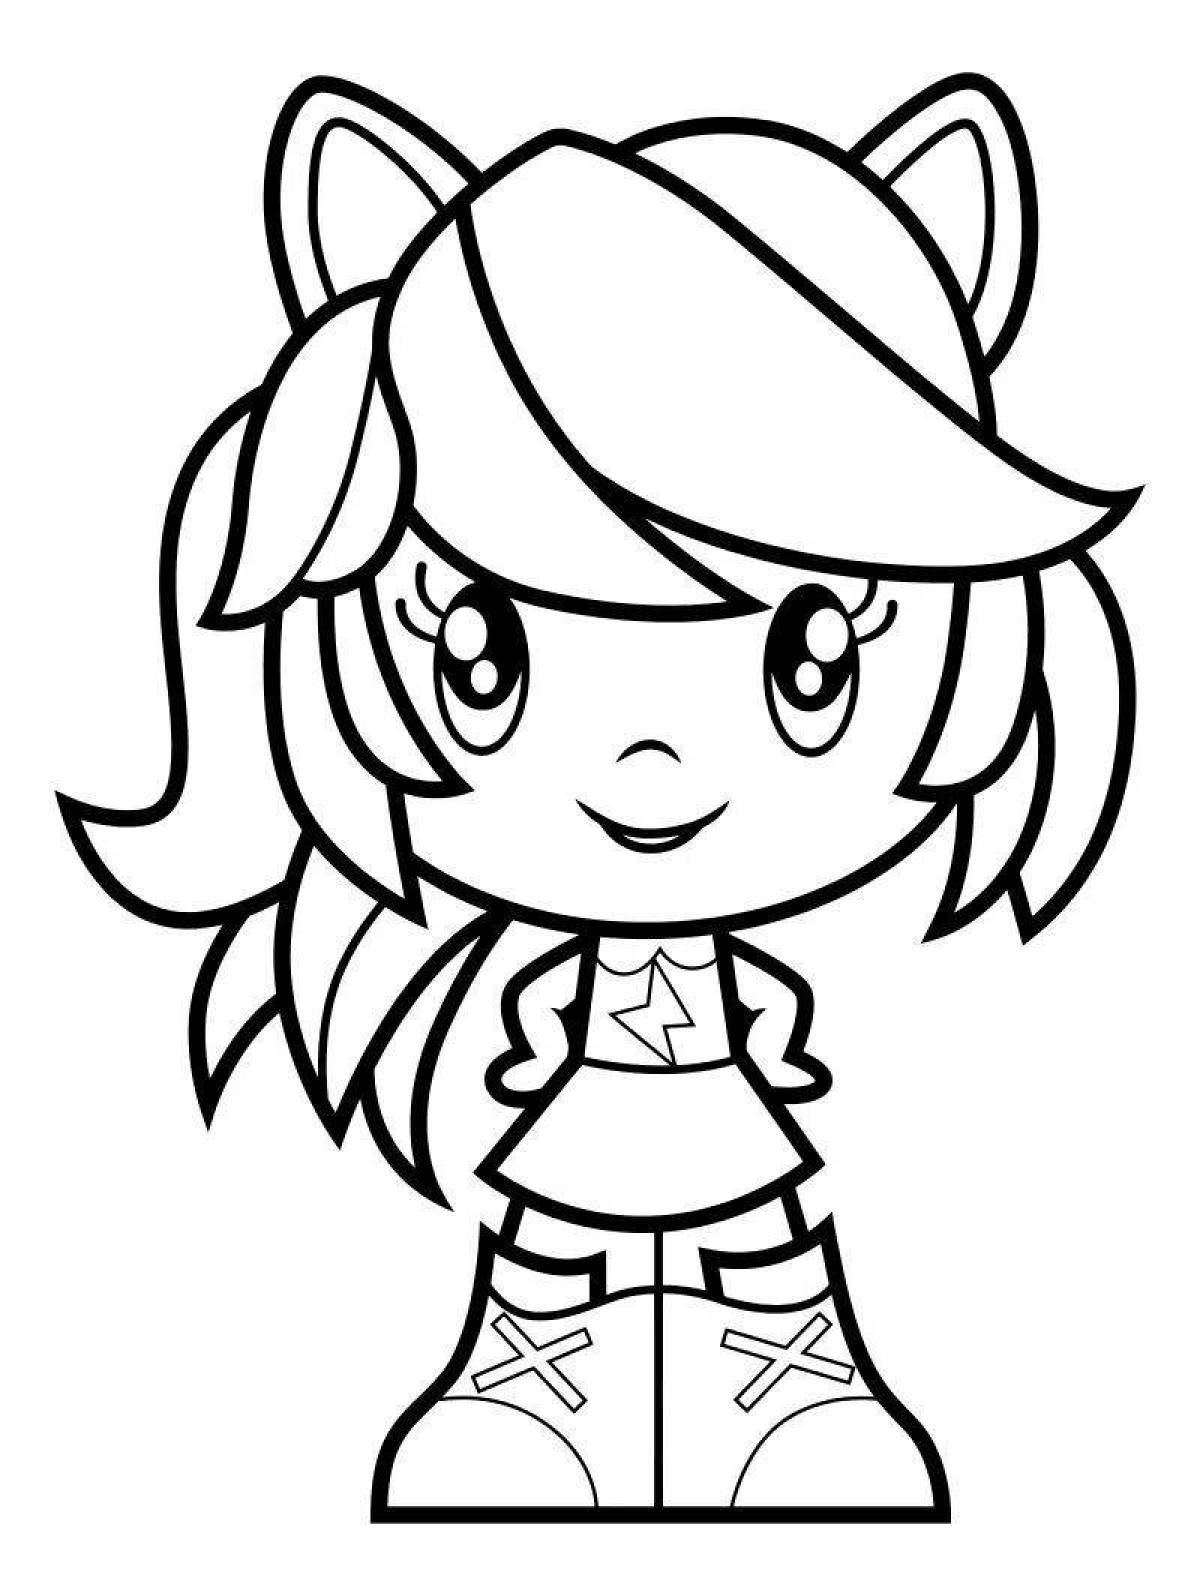 Cute pony coloring page